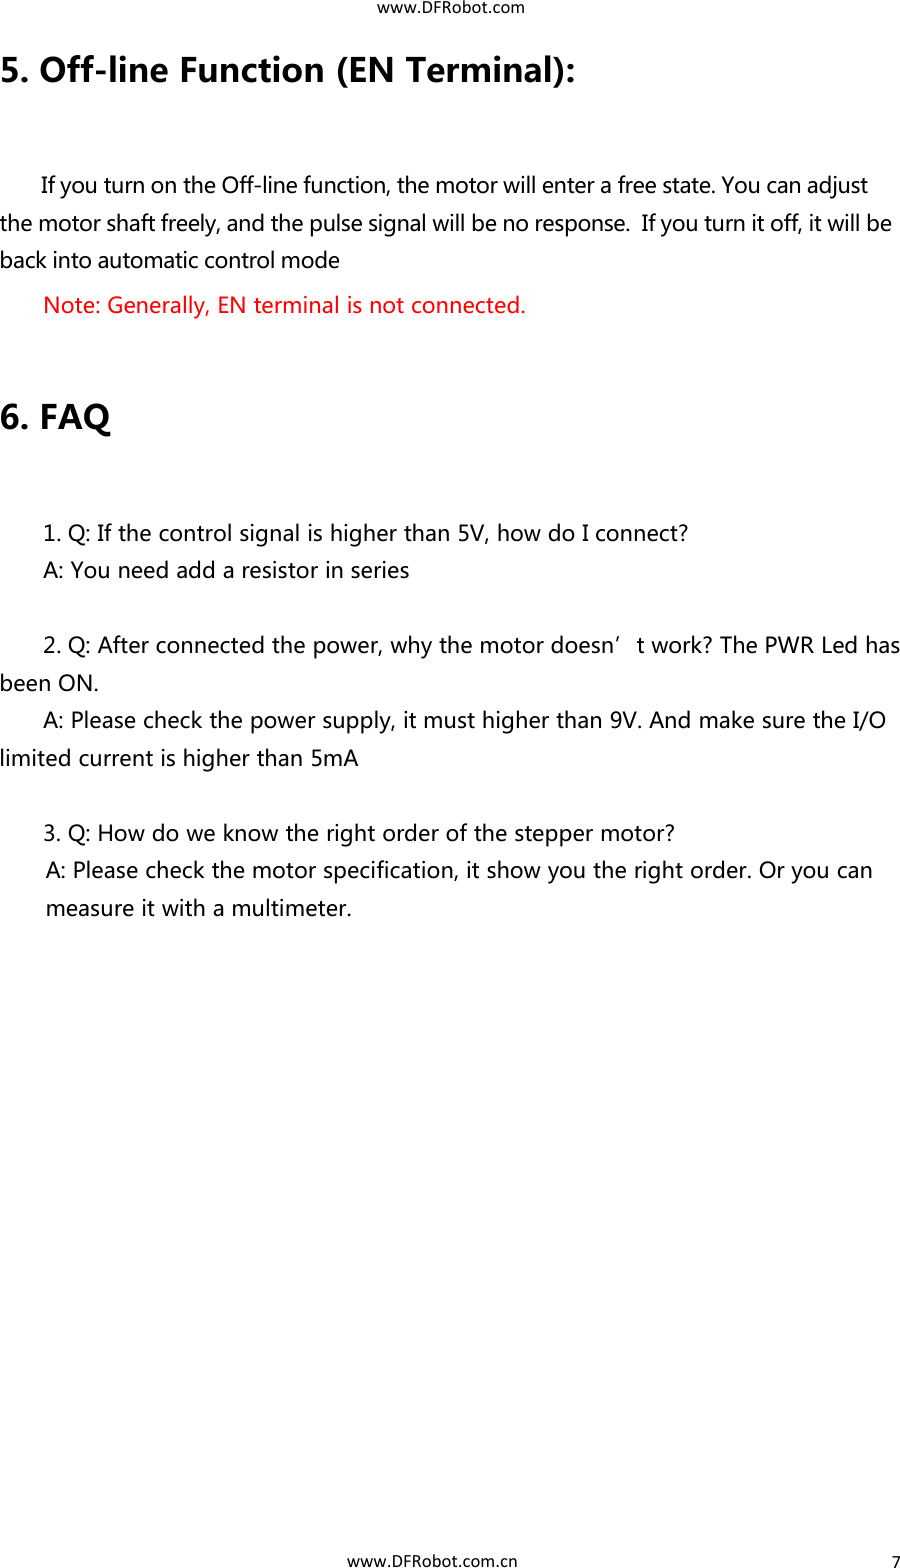 Page 10 of 11 - TB6600 User Guide V1.2